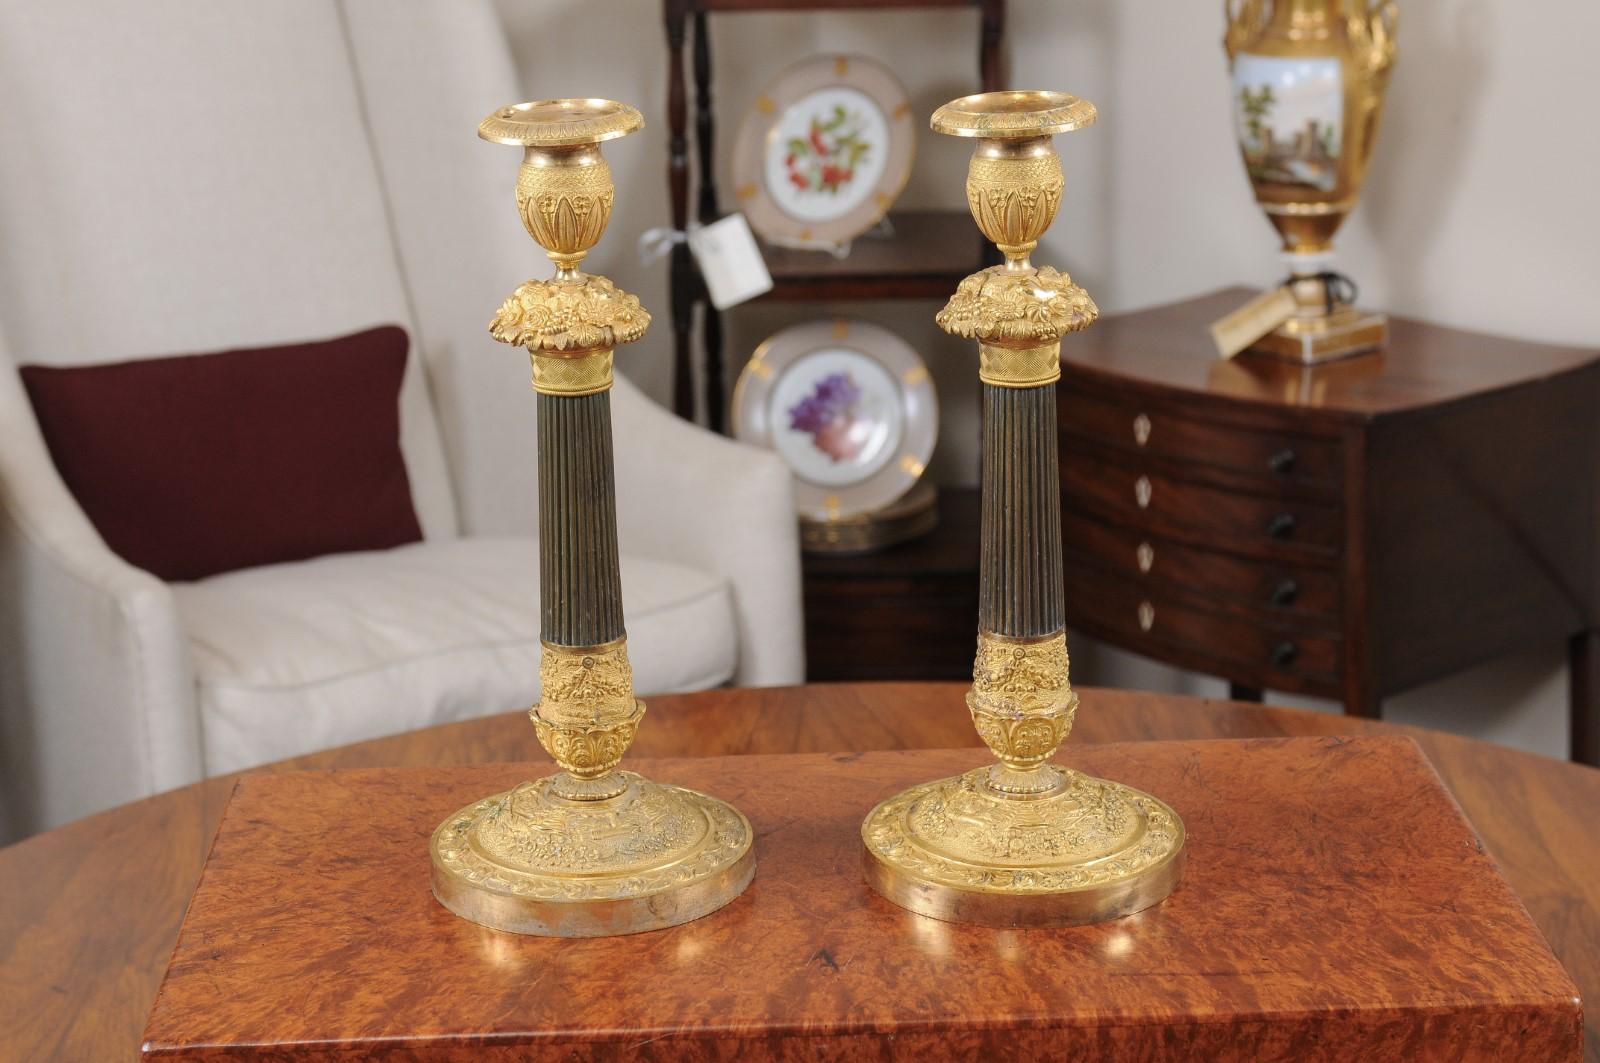 Pair of Bronze Dore Candlesticks with Foliage Design, Early 19th Century France For Sale 2